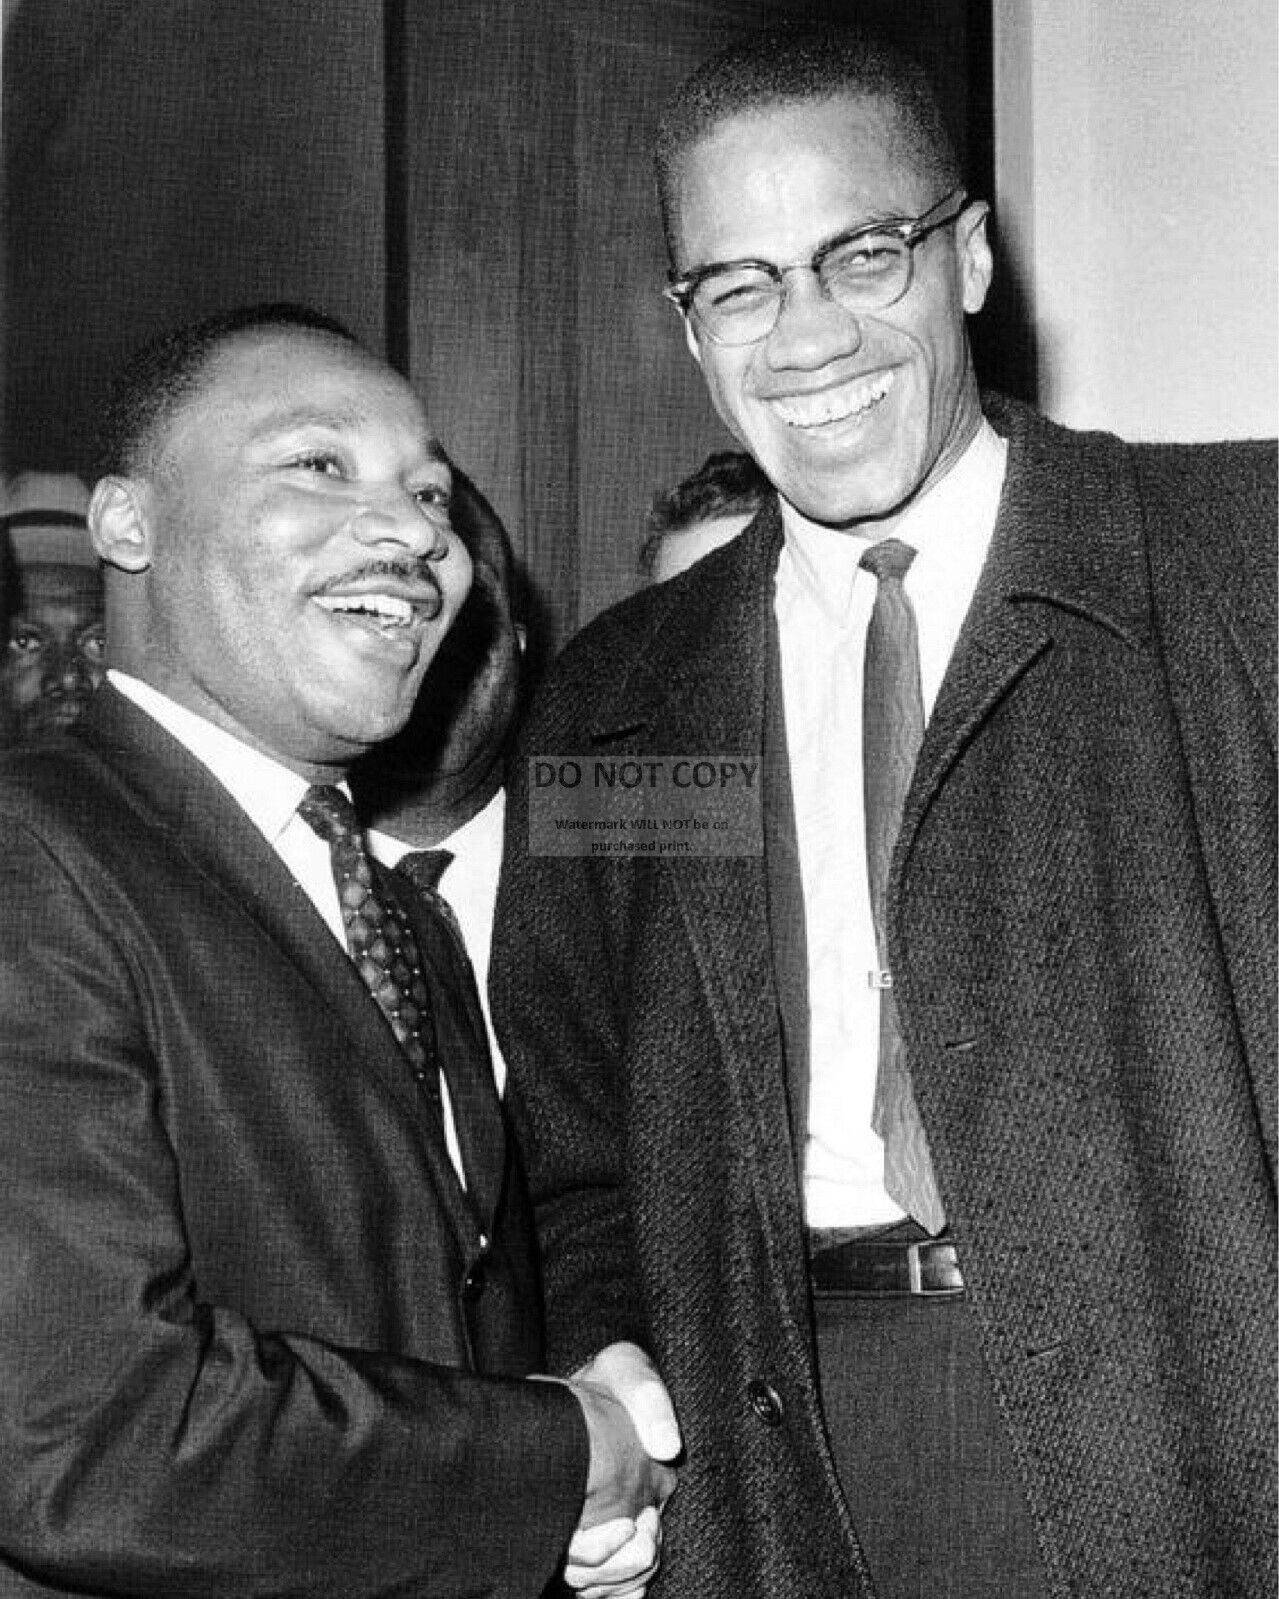 MARTIN LUTHER KING, JR. AND MALCOLM X CIVIL RIGHTS ICONS - 8X10 PHOTO (WW267)